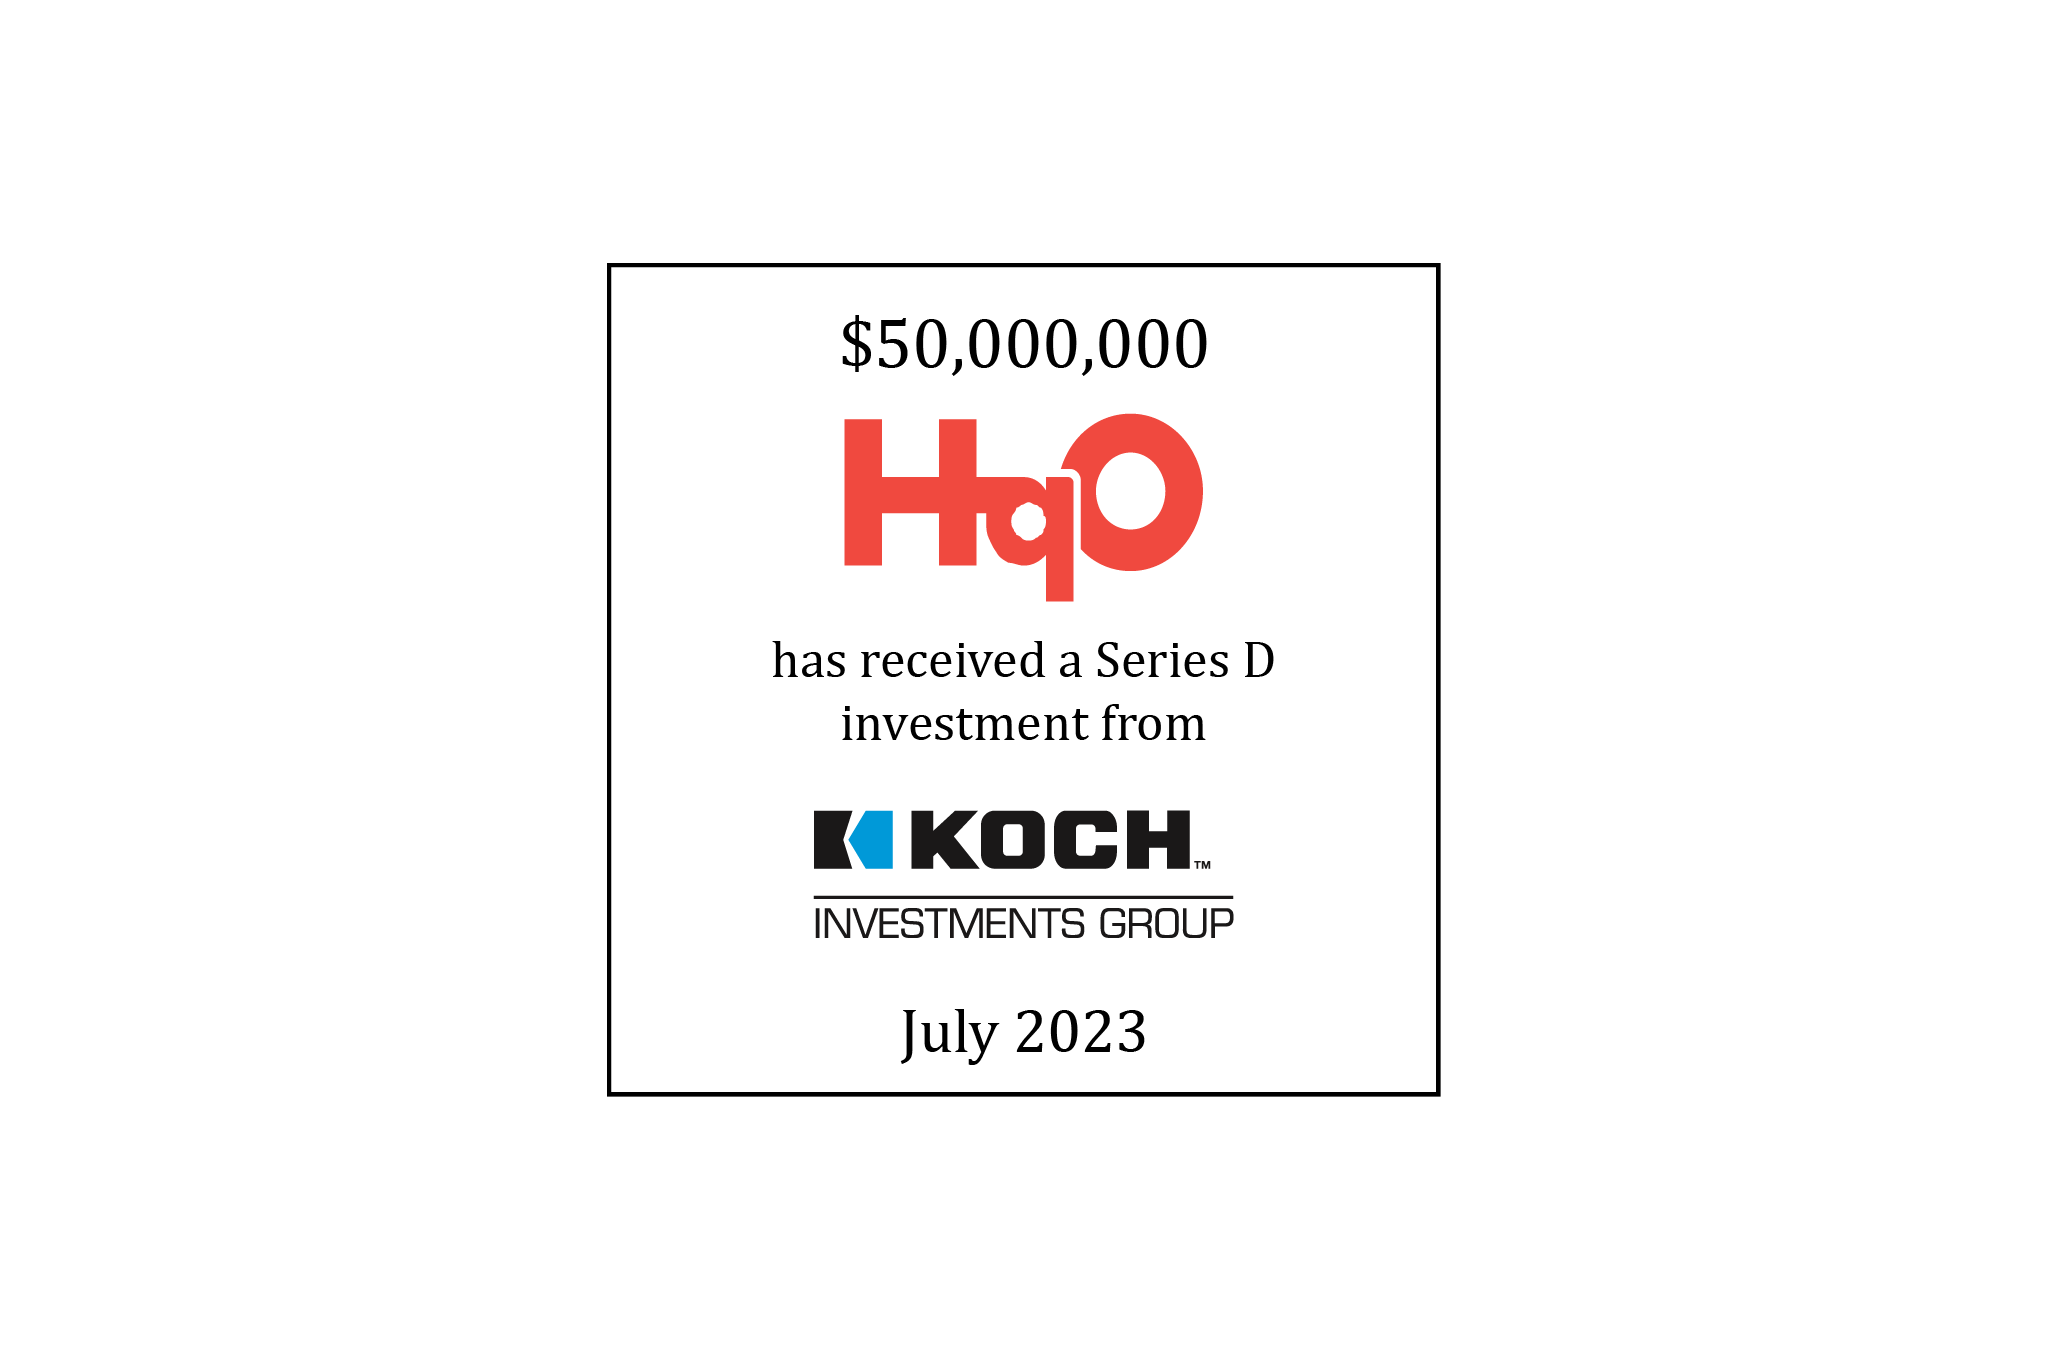 $50,000,000 | HqO (logo) has received a Series D investment from Koch Investments Corp (logo0 | July 2023